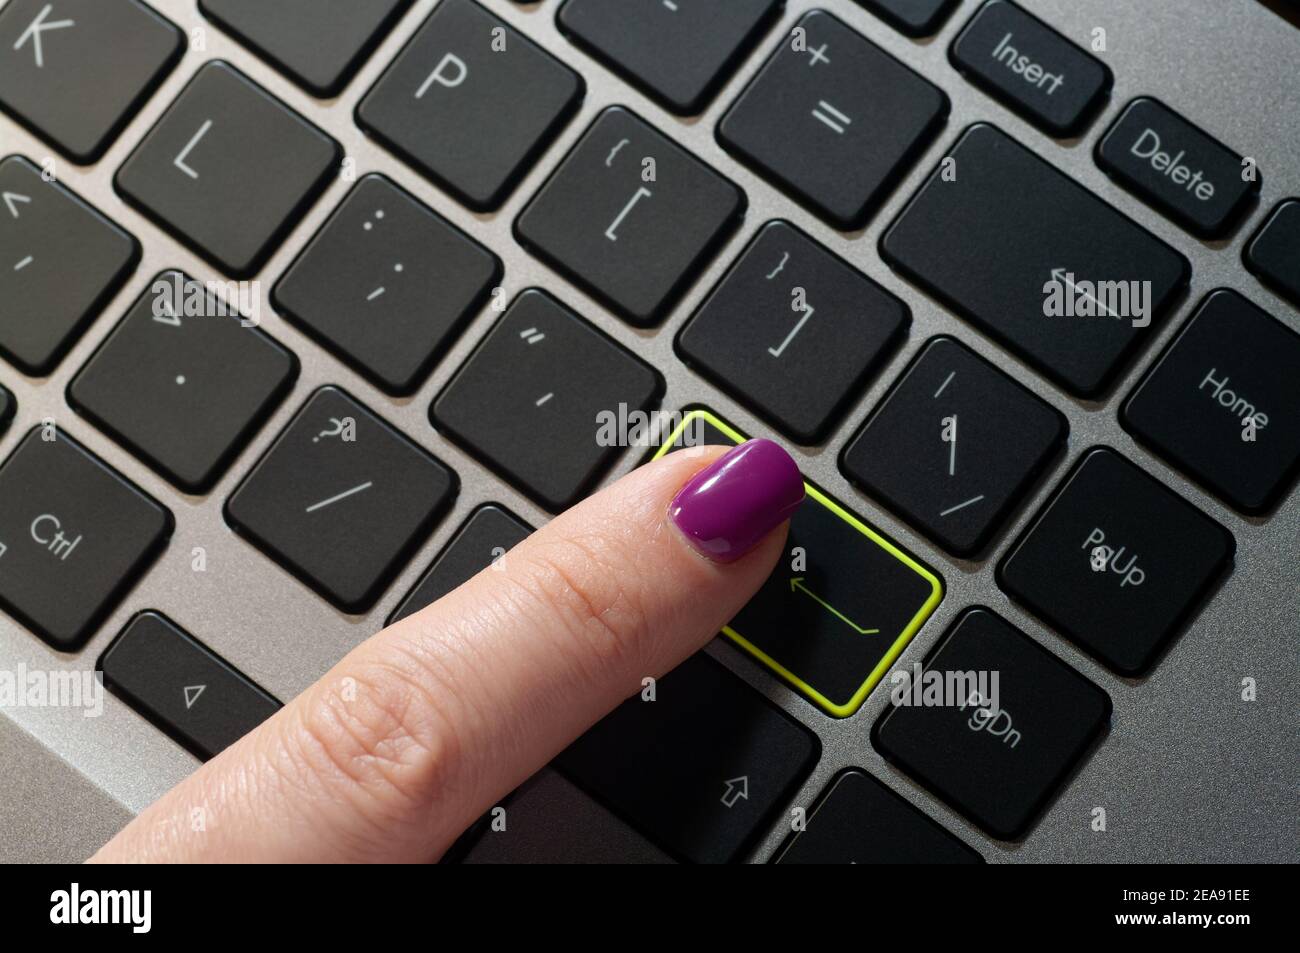 Close up woman's finger pressing enter button on the laptop keyboard. Stock Photo